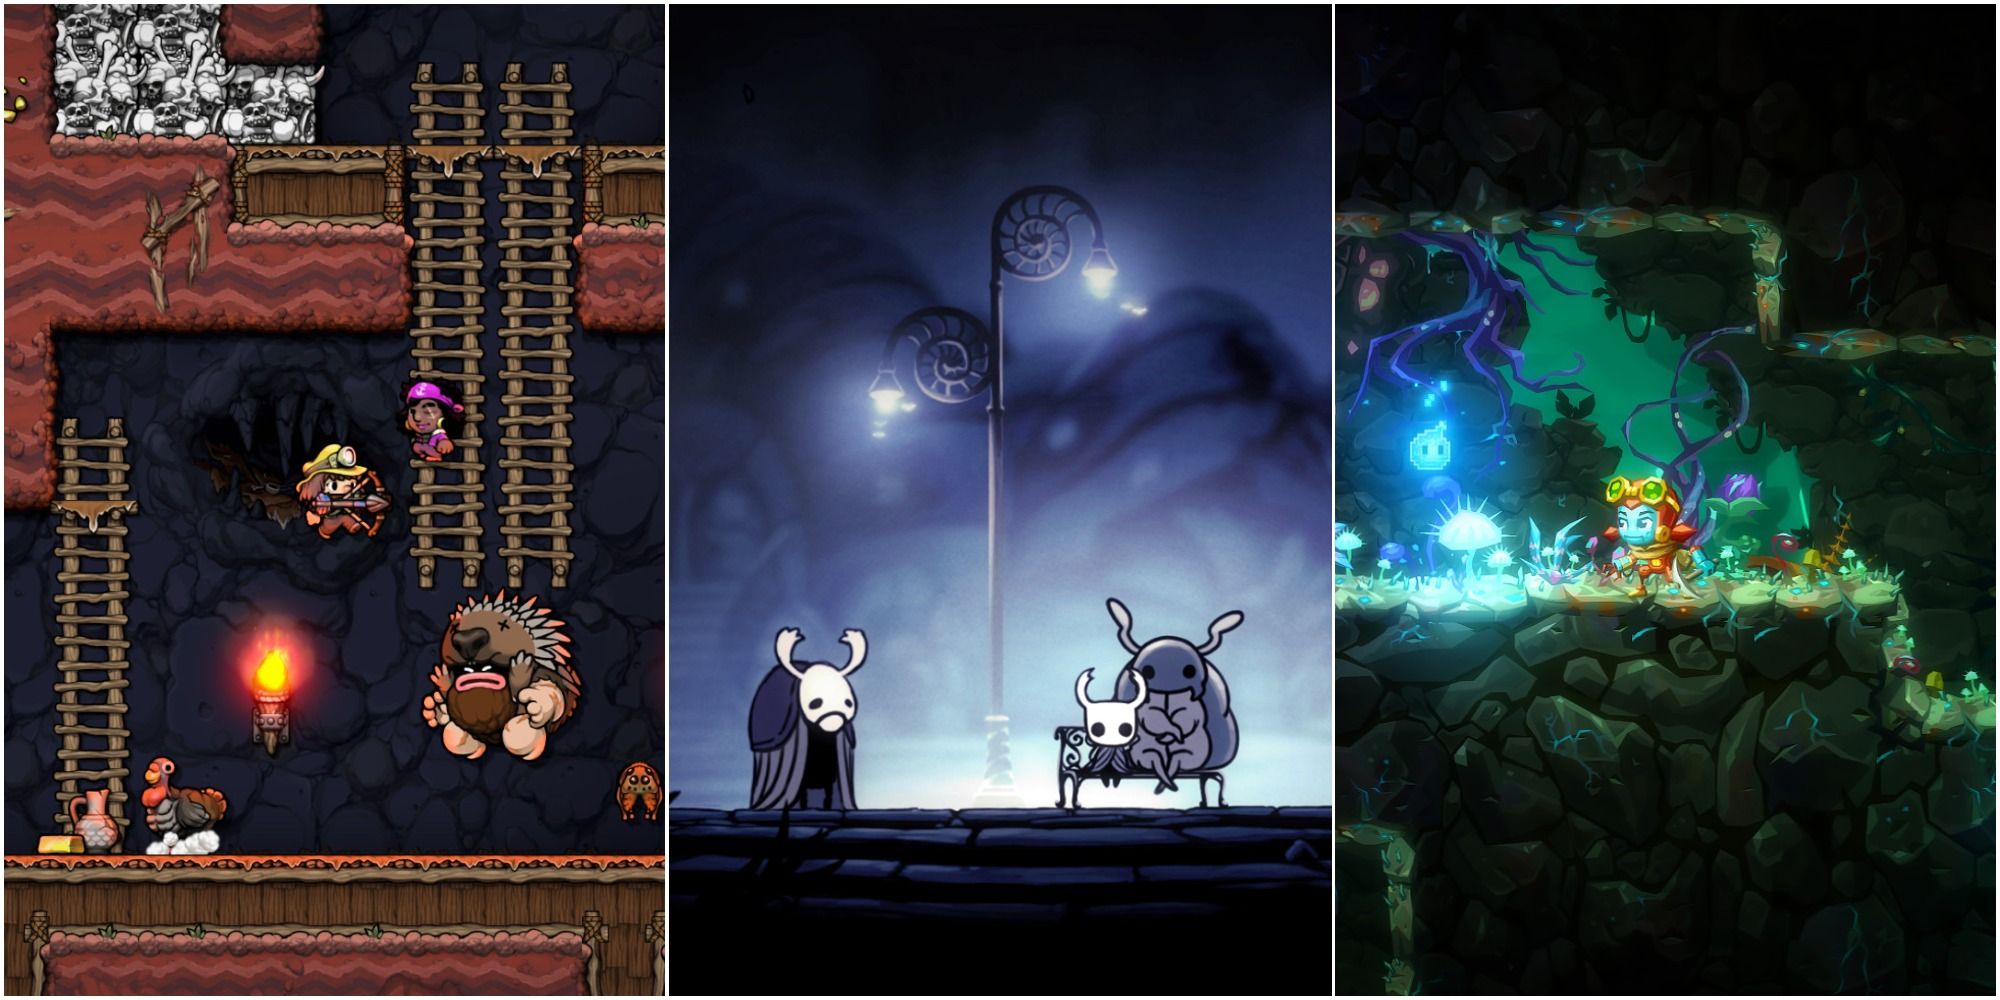 A screenshot showing scenes and gameplay in Spelunky 2, Hollow Knight, and SteamWorld Dig 2